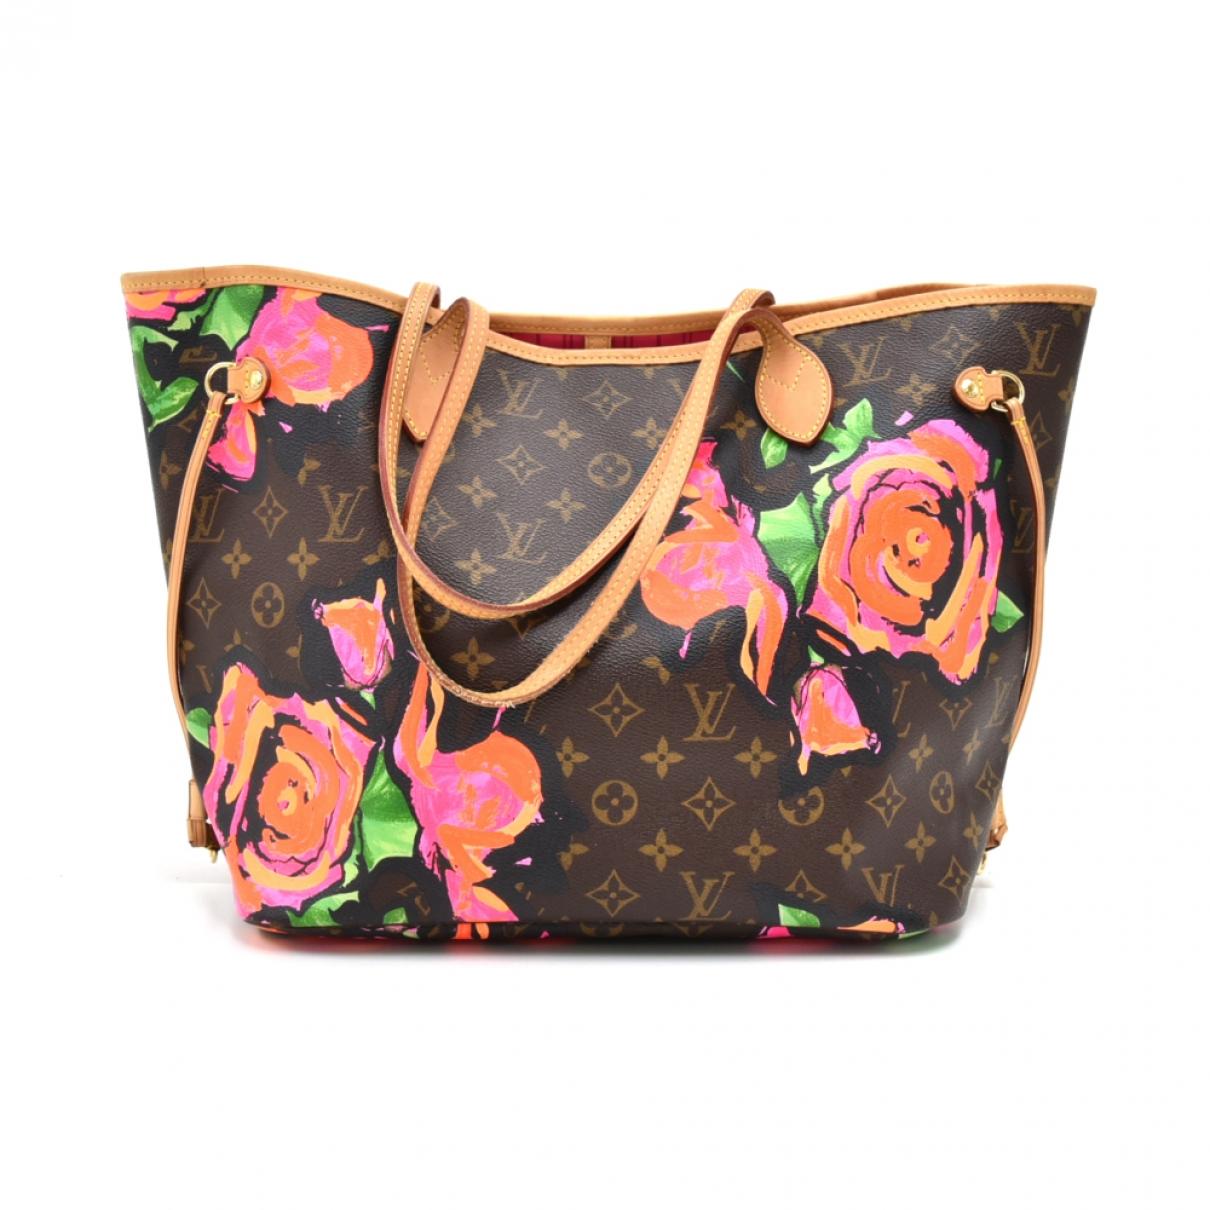 louis vuitton neverfull mm Archives